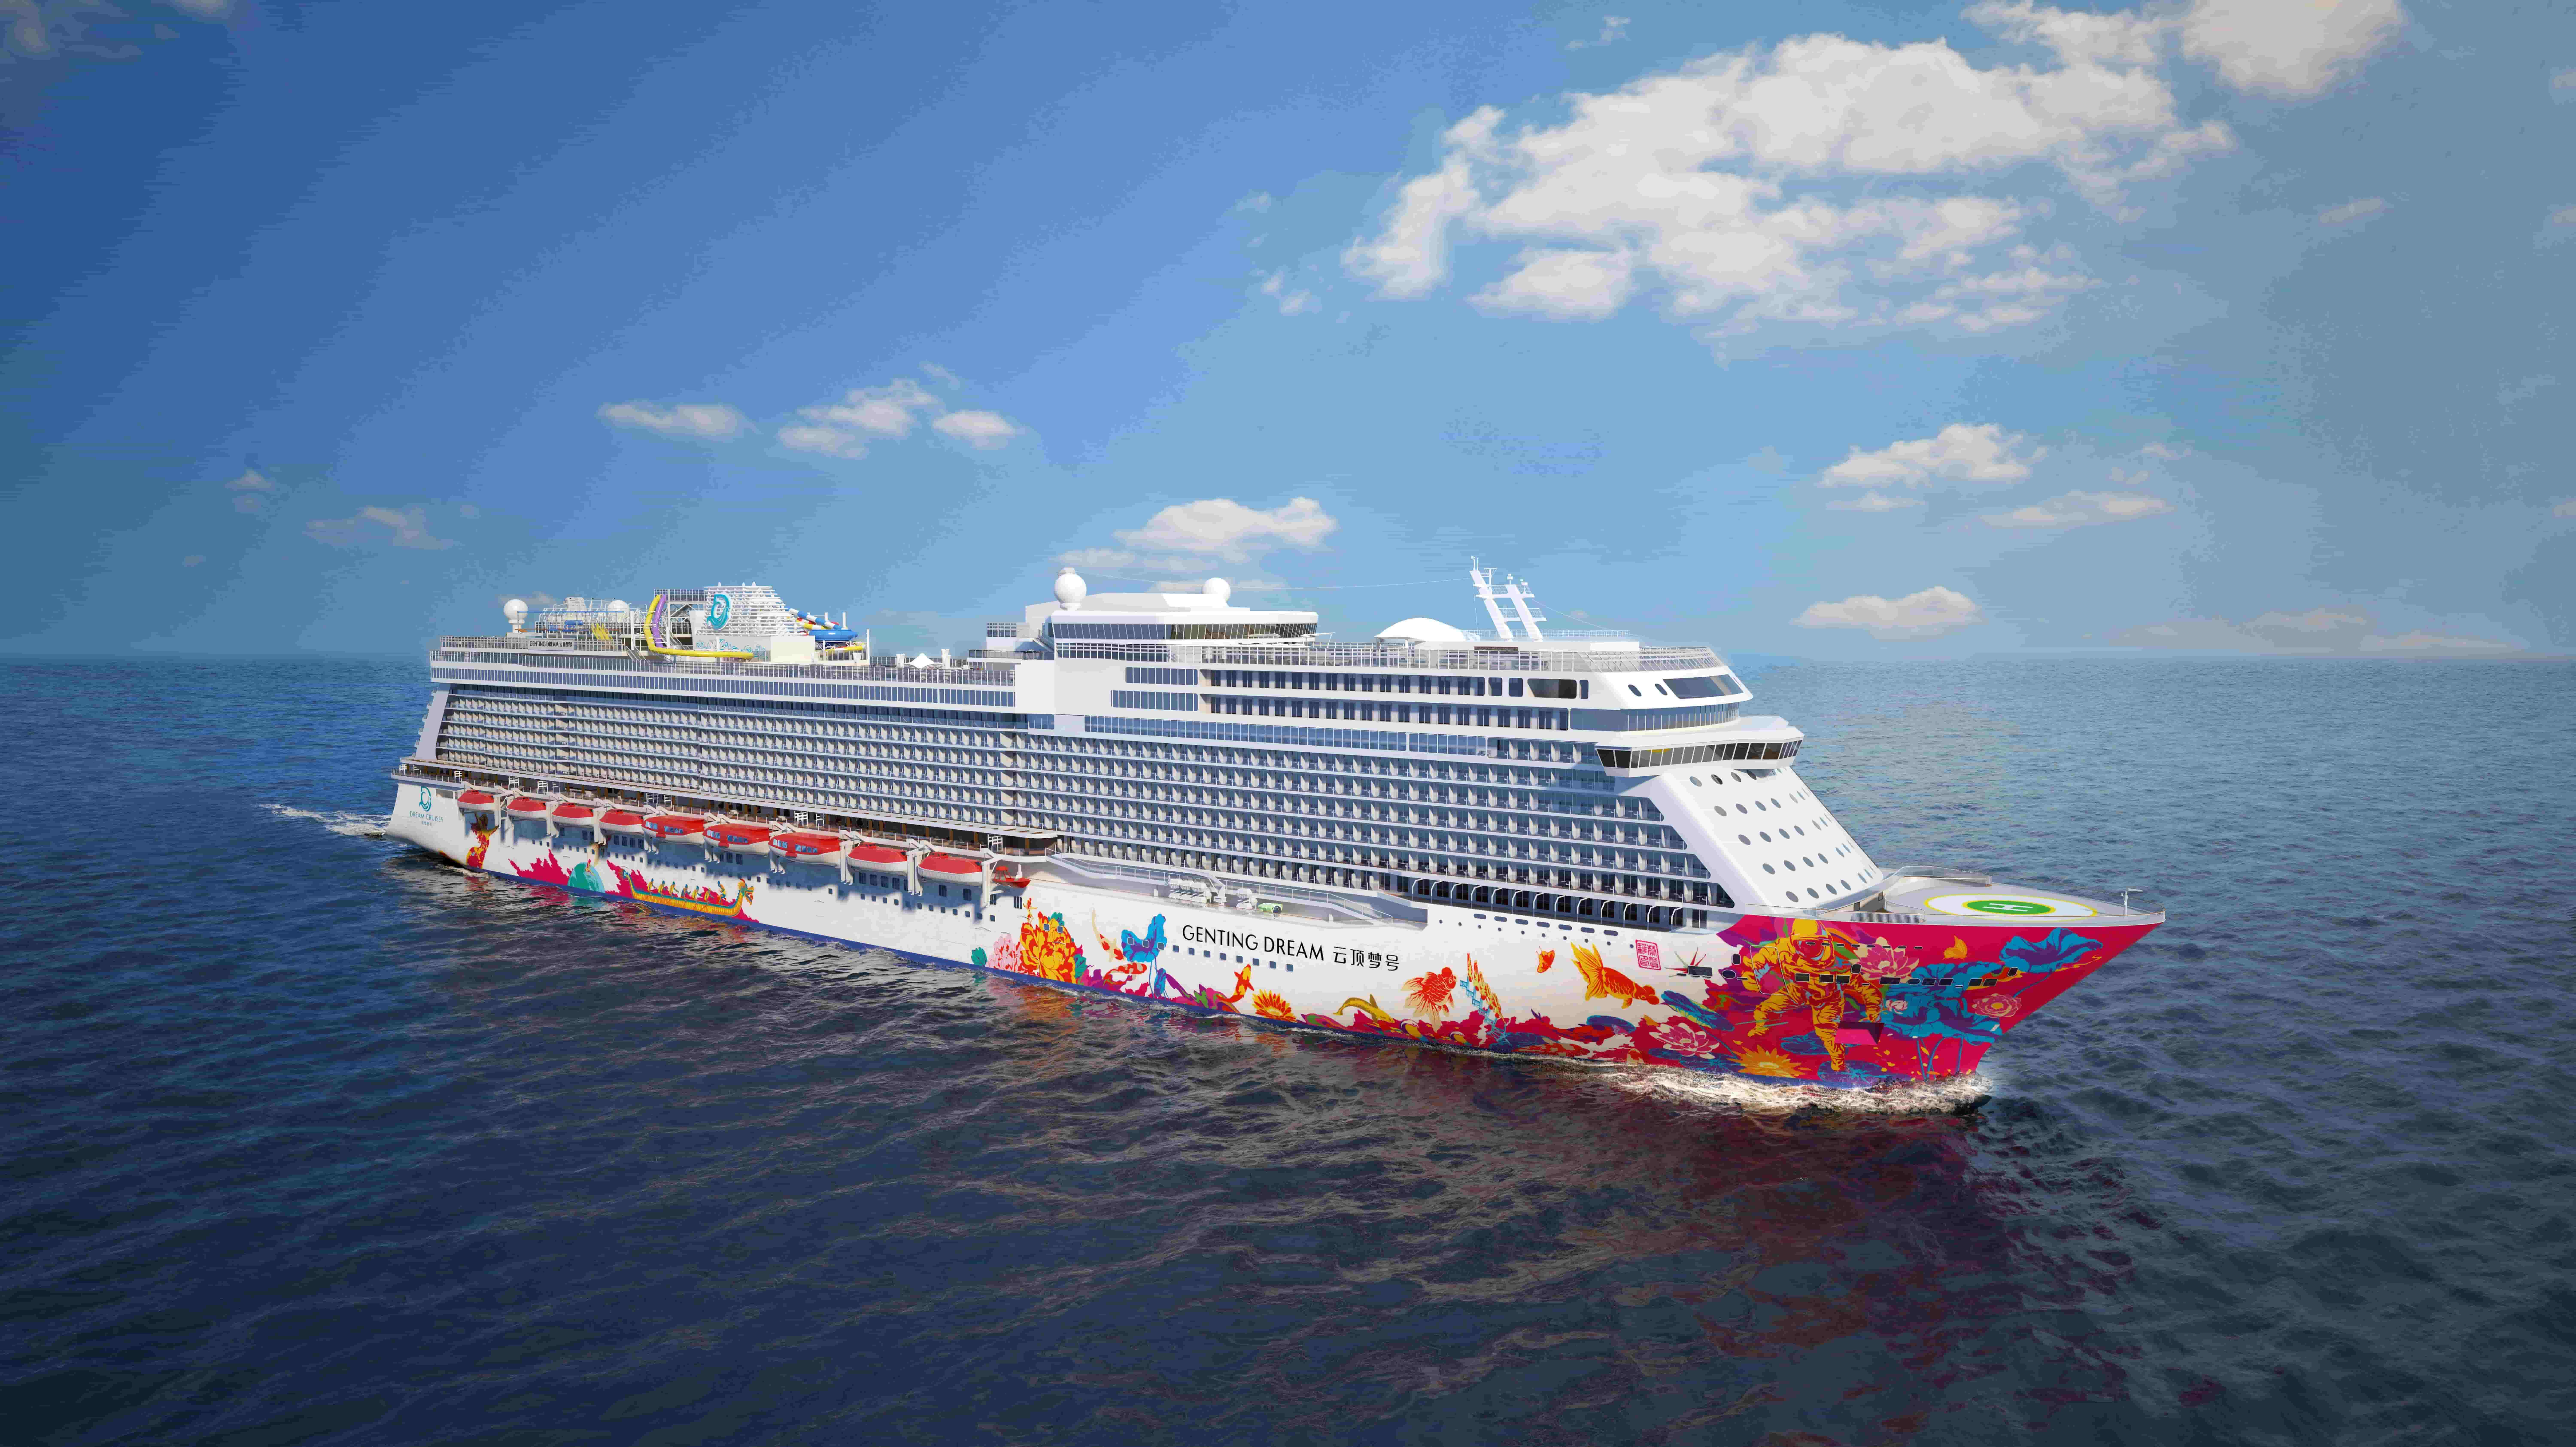 FirstEver Asian Luxury Cruise Line Dream Cruises Officially Launches